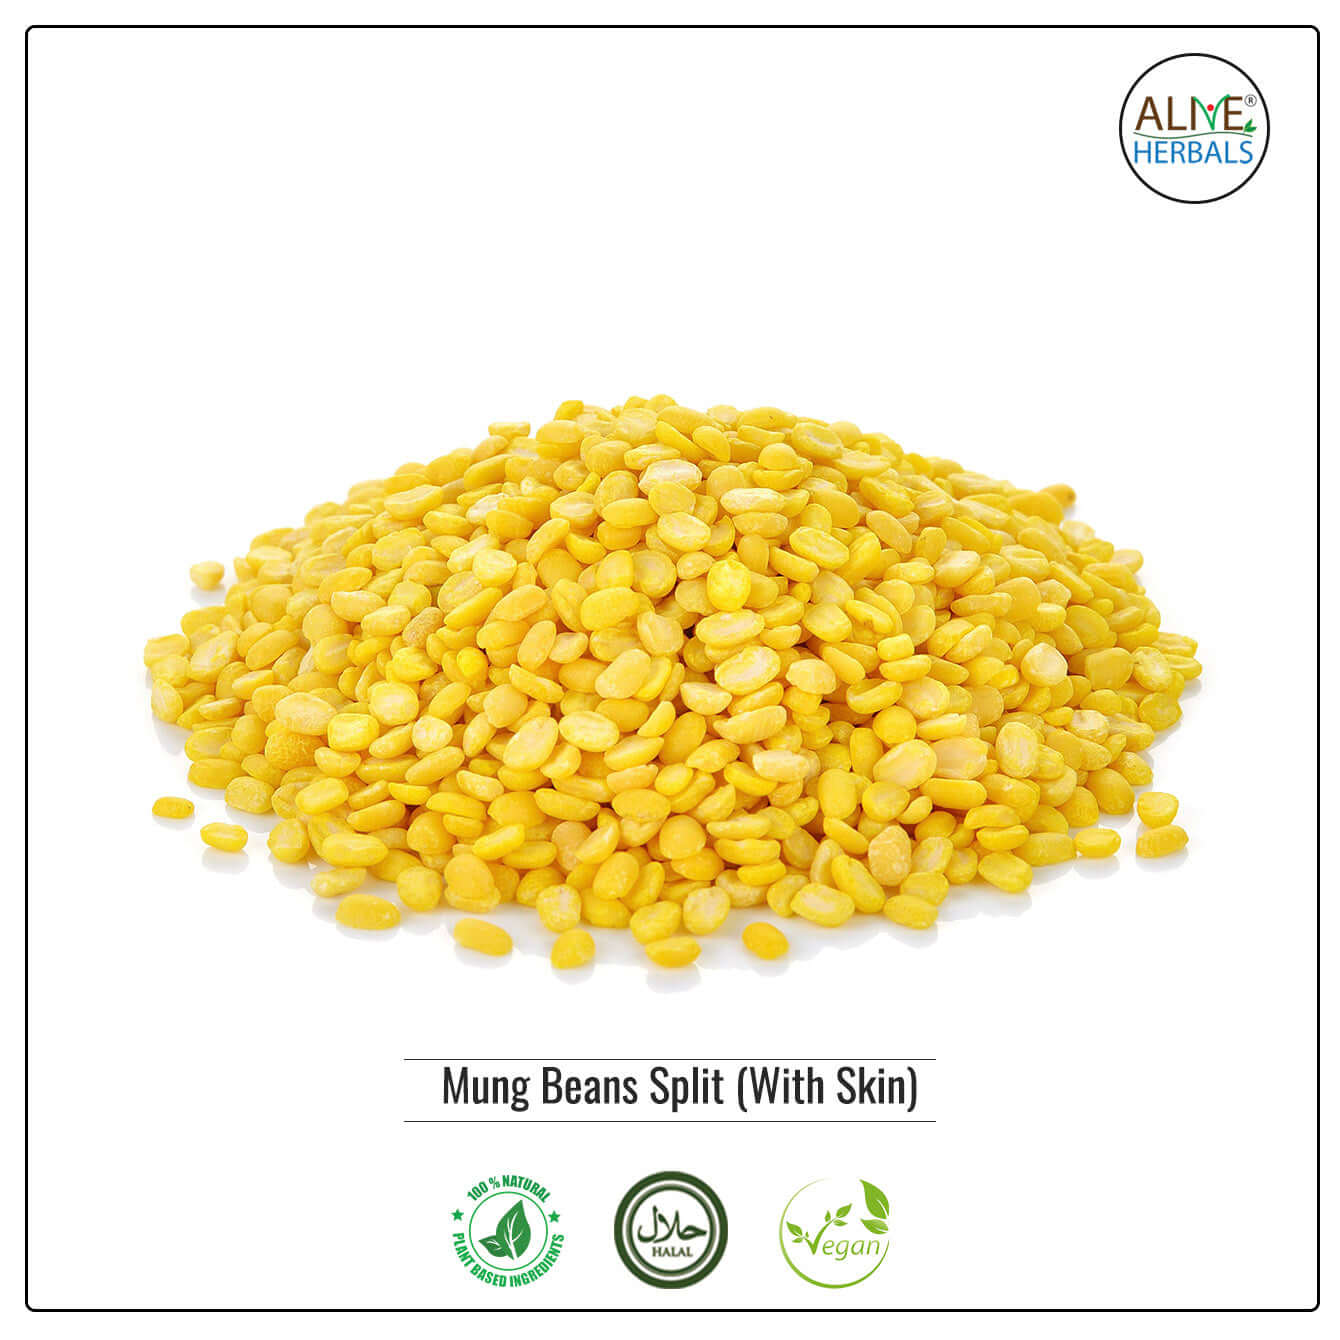 Mung Beans Split (With Skin) - Shop at Natural Food Store | Alive Herbals.